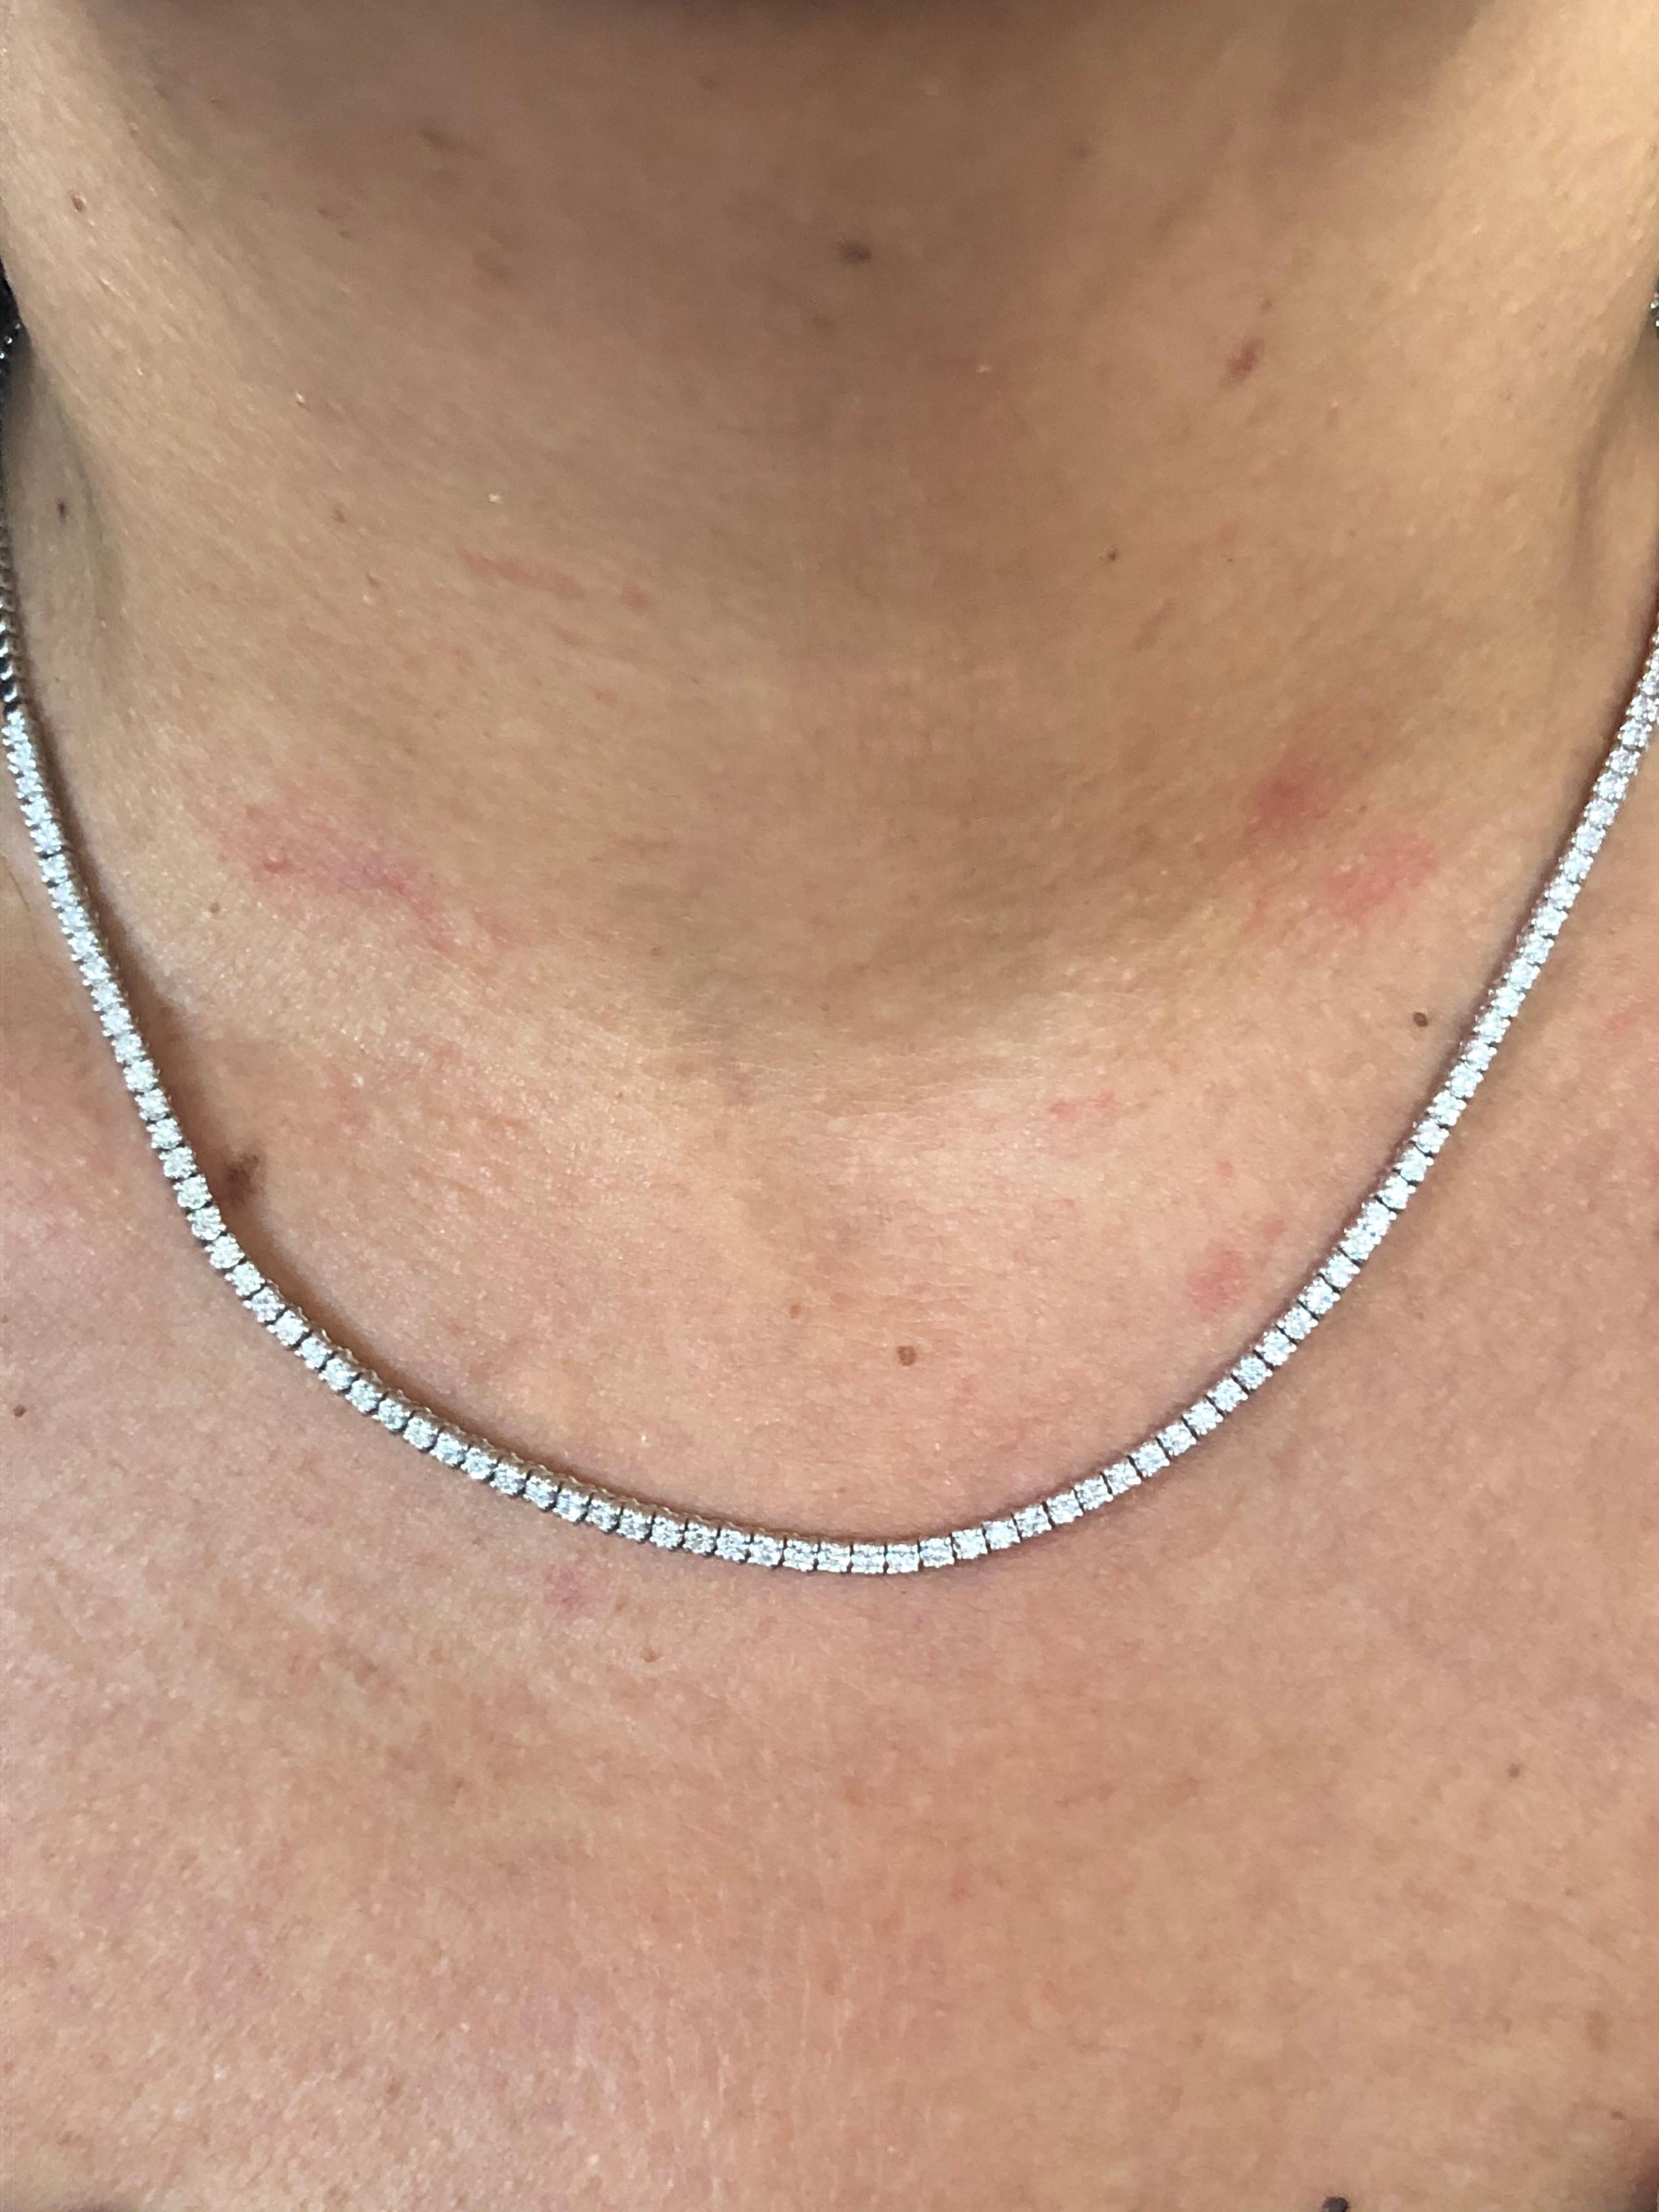 Tennis necklace set with diamonds 3/4 of the way in 14K white gold. Each stone weighs 0.03 carats. The total diamond weight of the necklace is 3.83 carats. The color of the stones are G-H, the clarity is SI1-SI2.  The necklace is measured at 17